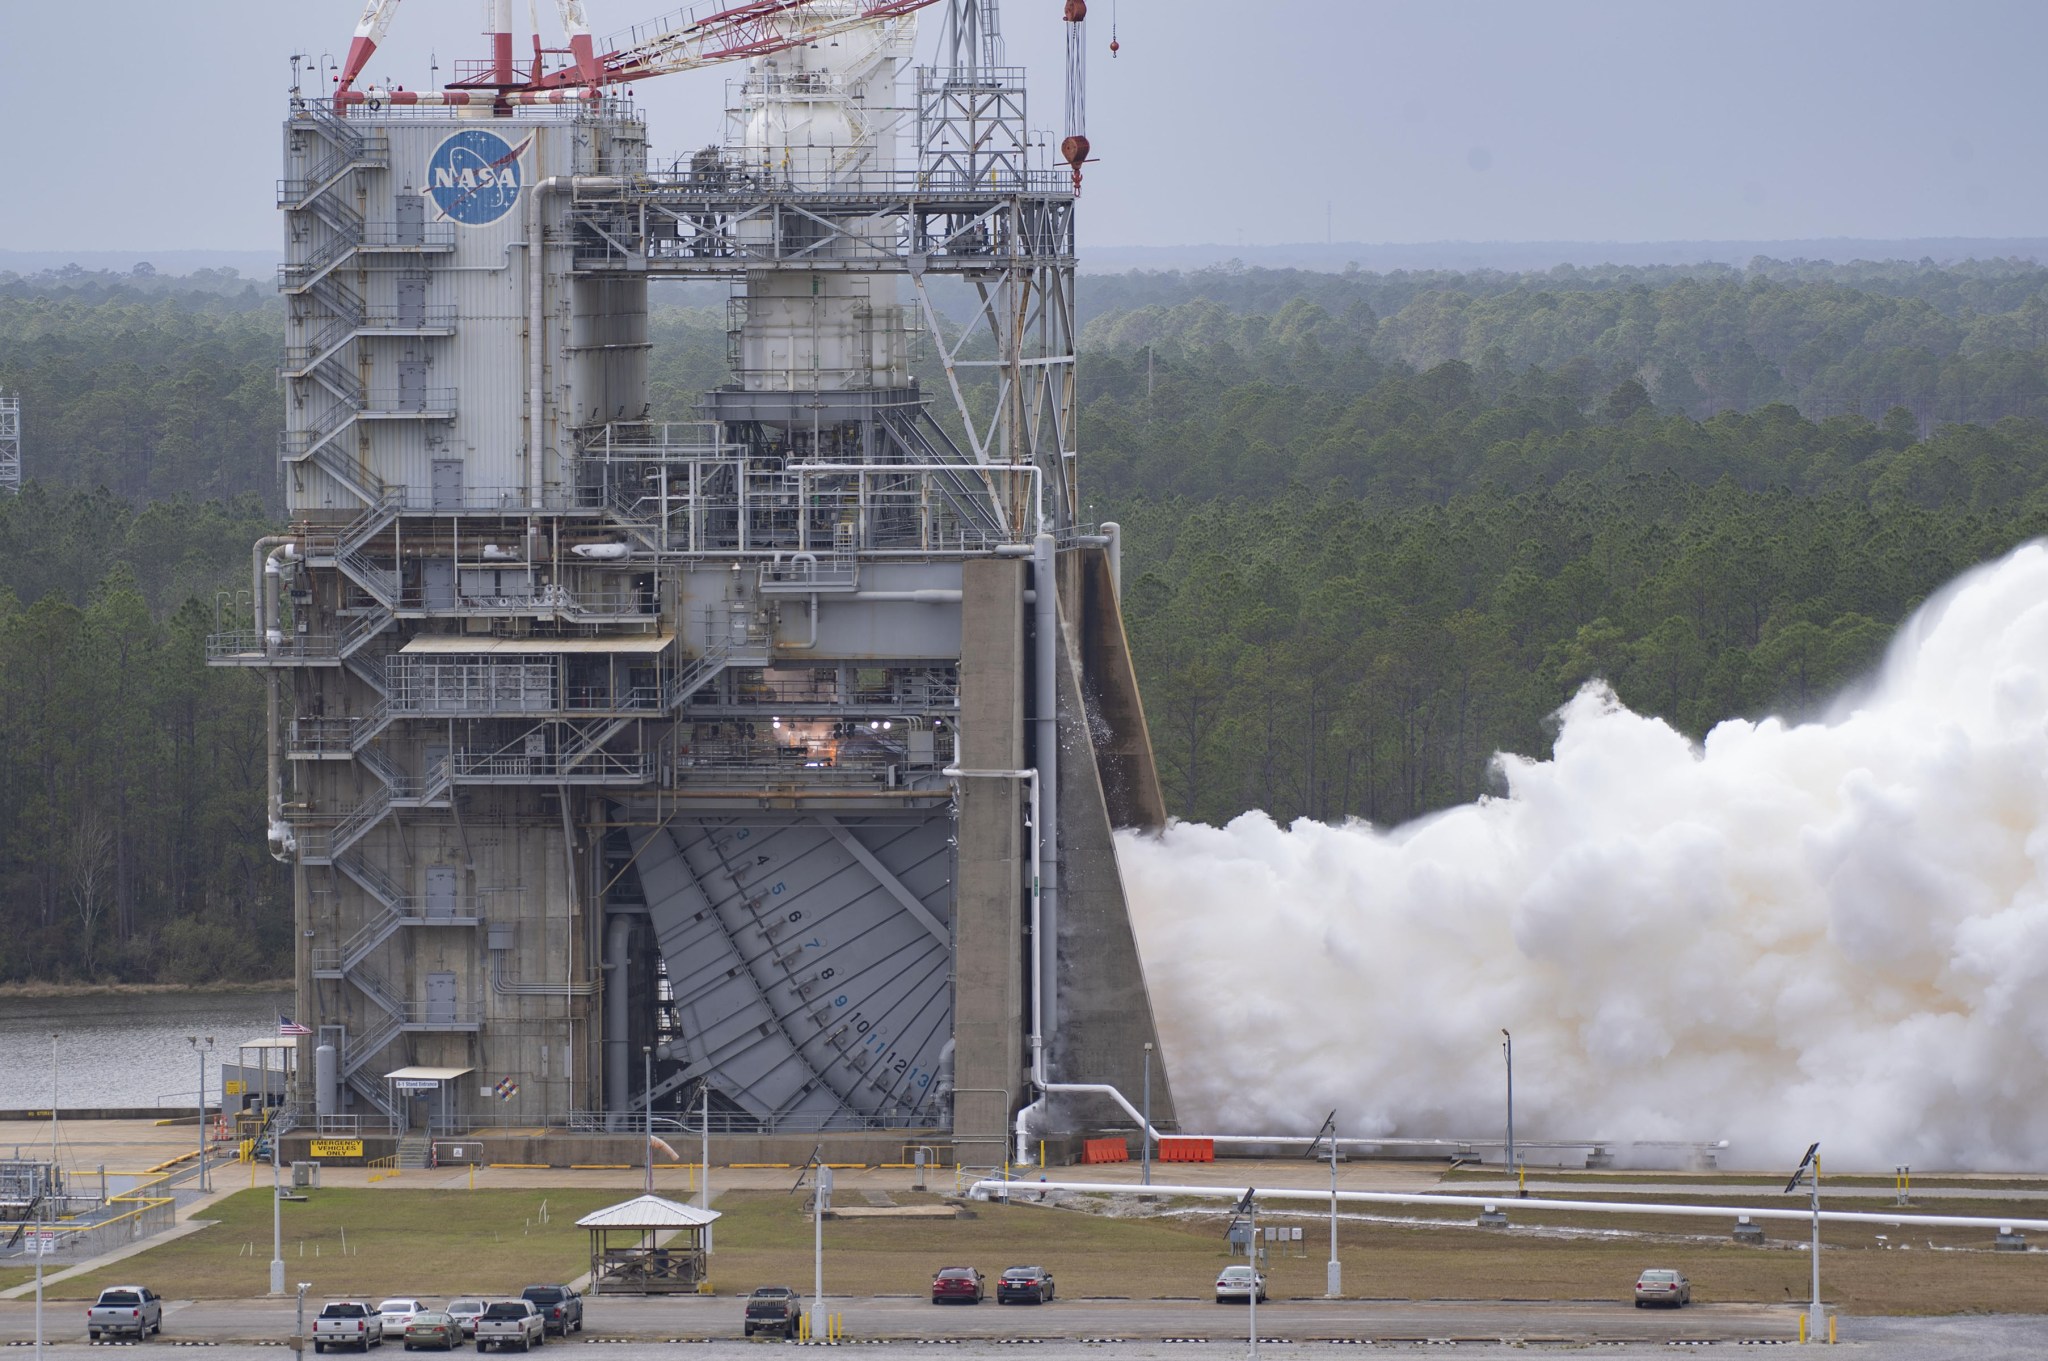 NASA conducts an RS-25 hot fire on the Fred Haise Test Stand at Stennis Space Center in south Mississippi on Feb. 8, 2023